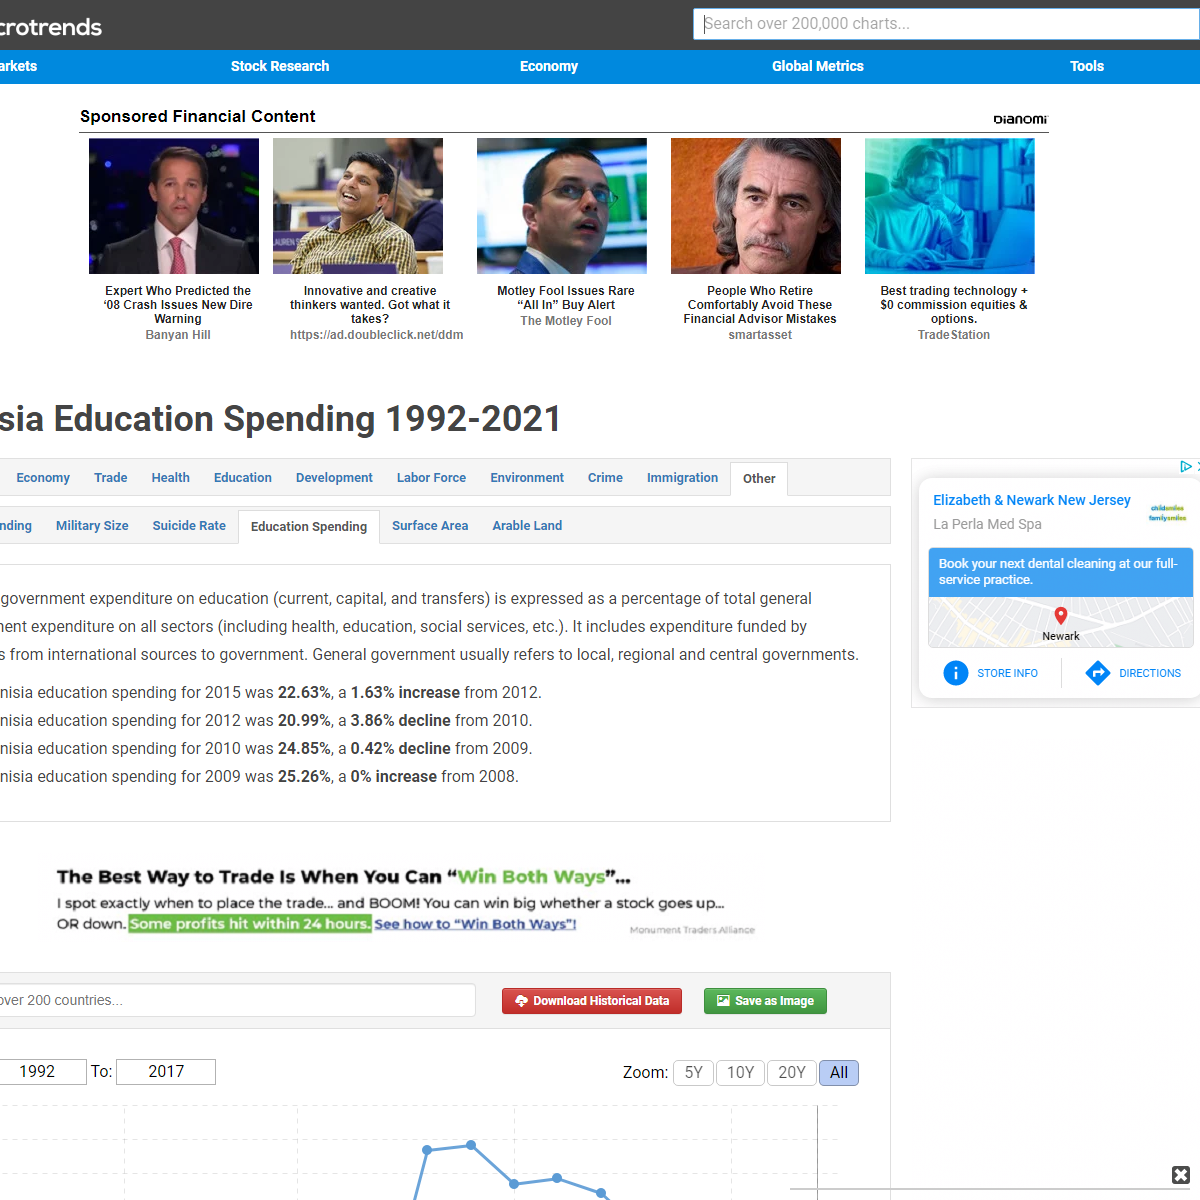 A complete backup of https://www.macrotrends.net/countries/TUN/tunisia/education-spending